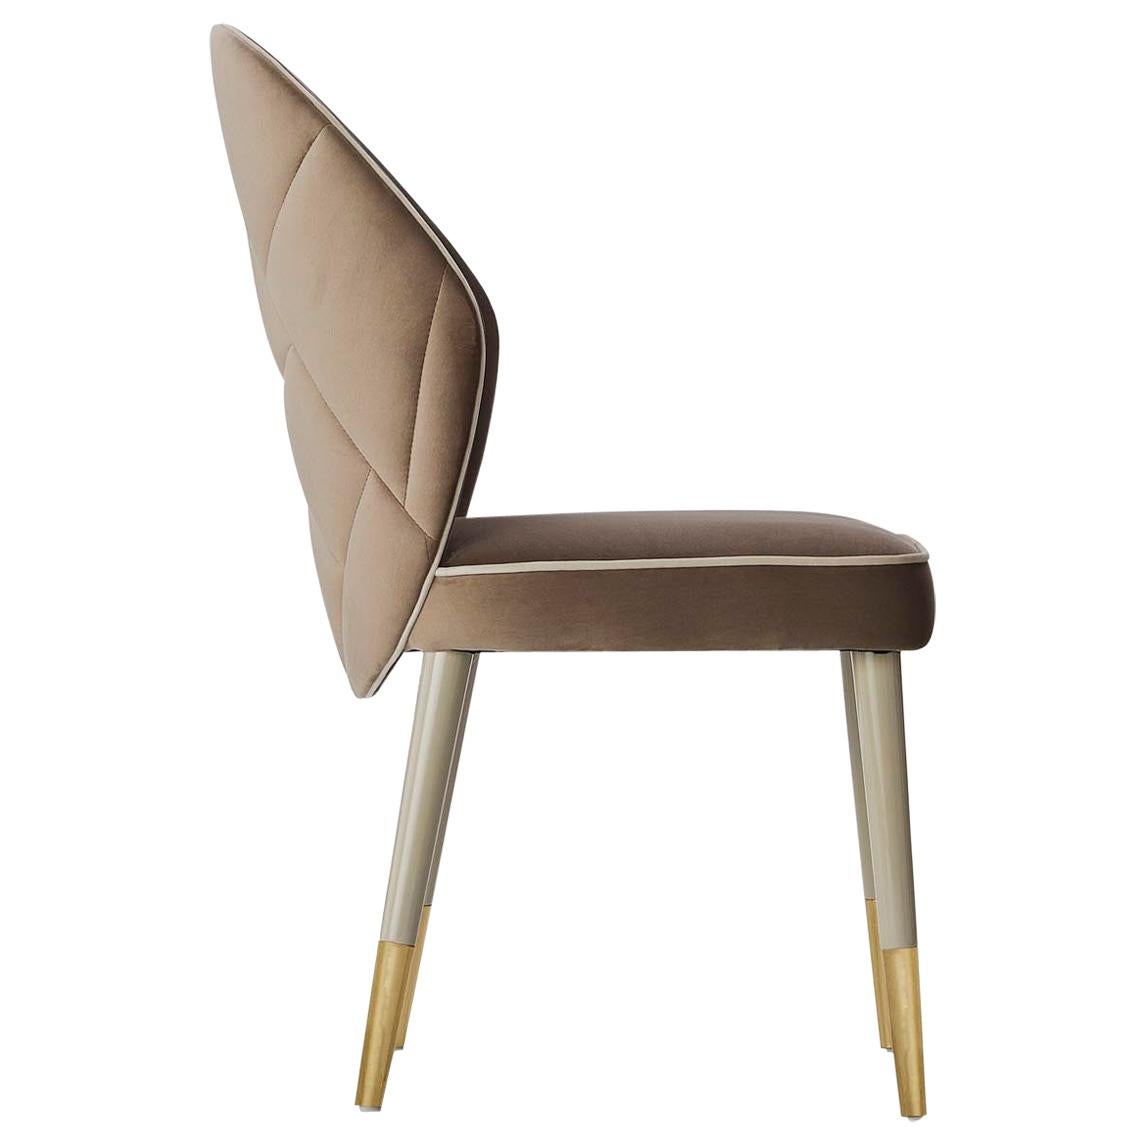 Beyond its undeniable beauty, Sophia dining chair is an elegant and comfortable piece, with sophisticated details on its back.
Outlined by beautiful piping detail, this chair set comes upholstered with project 4 taupe (structure) and comfort 2